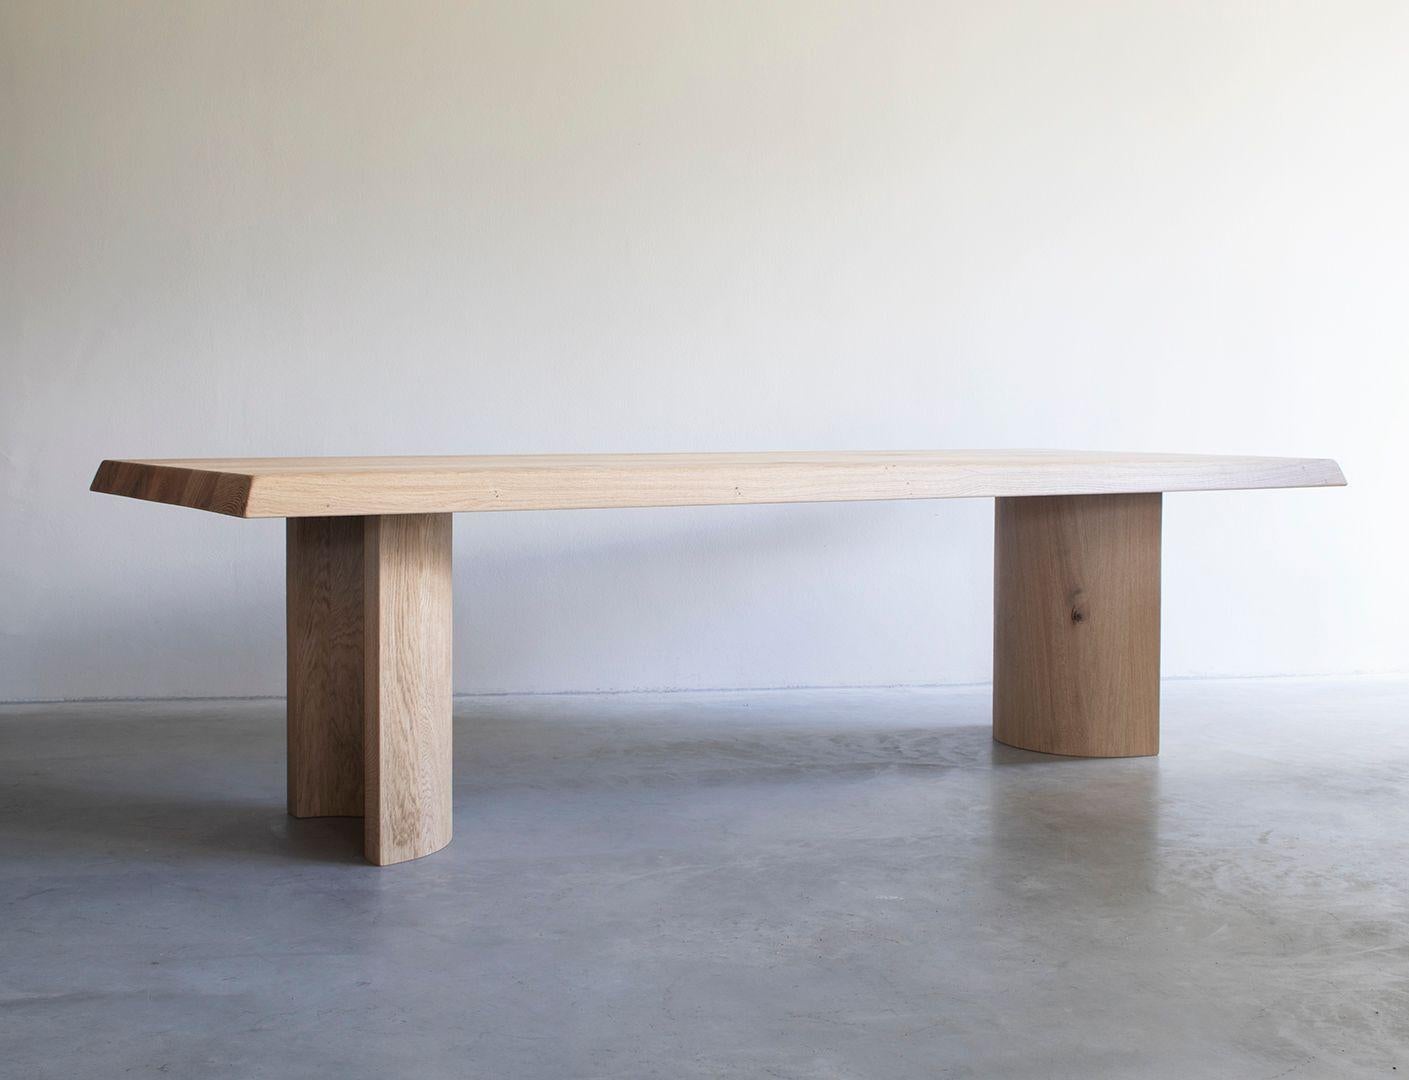 Beam dining table by Van Rossum.
Dimensions: D320 x W110 x H75 cm
Materials: Oak.
Also available in walnut. 

The wood is available in all standard Van Rossum colors, or in a matching finish to customer’s own sample. Please contact us.

Solid